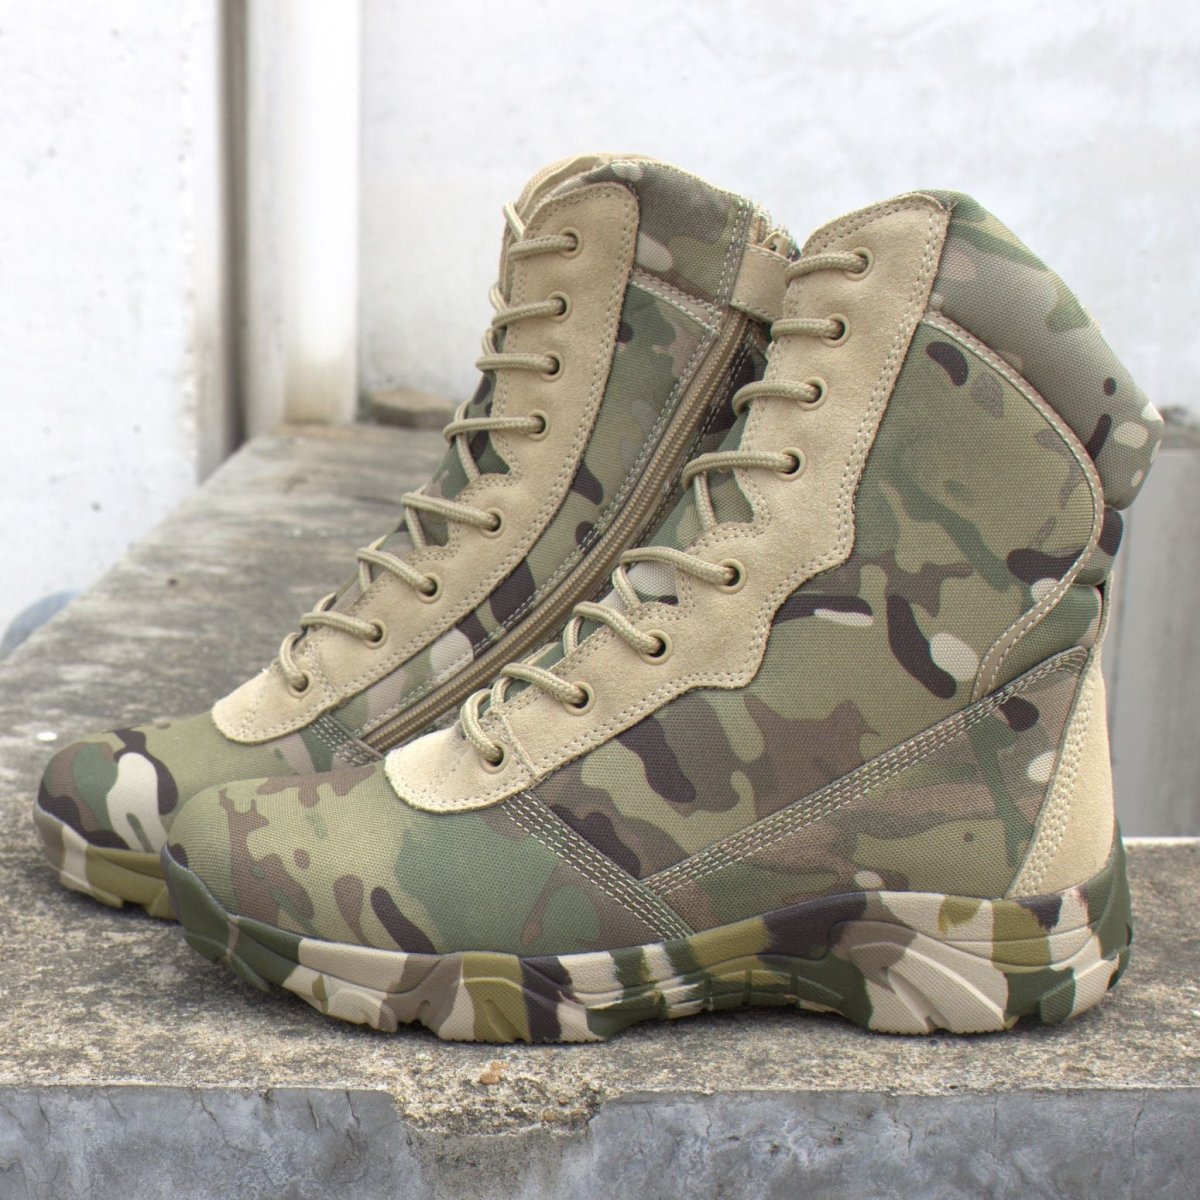 Stand out in style with our trendy camouflage boots. - InspiredGrabs.com